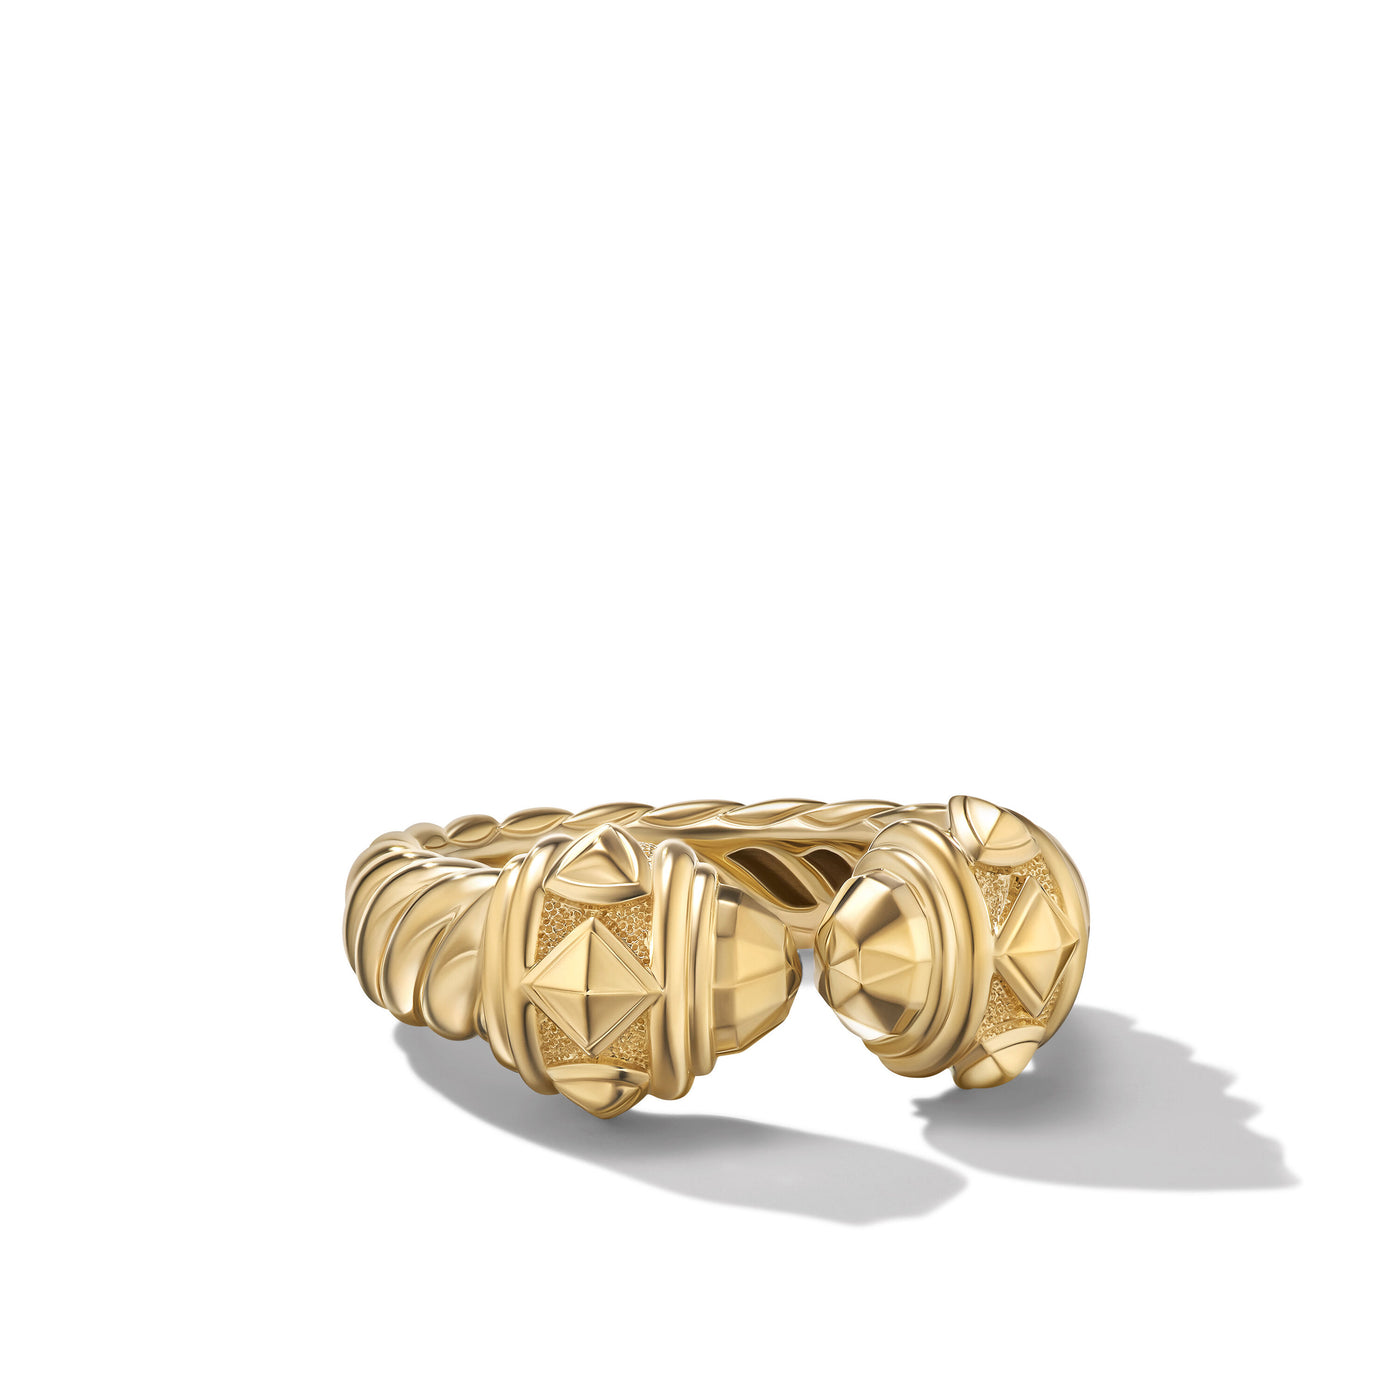 Renaissance® Ring in 18K Yellow Gold\, 6.5mm